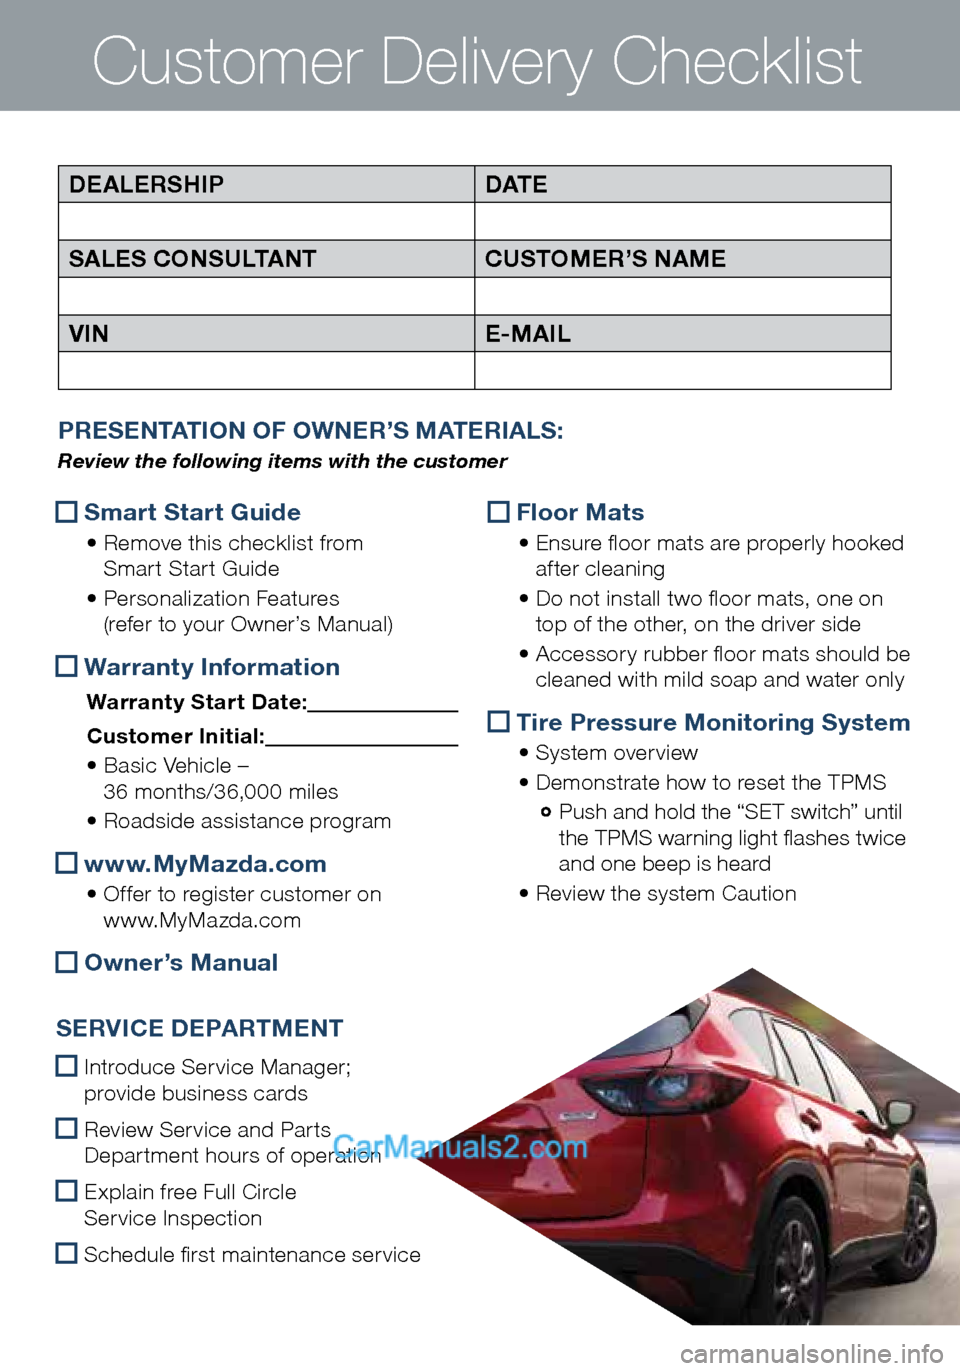 MAZDA MODEL CX-5 2016  Smart Start Guide (in English) Customer Delivery Checklist
PRESENTATION OF OWNER’S MATERIALS:  
Review the following items with the customer
DEALERSHIPDAT E
SALES CONSULTANT CUSTOMER’S NAME
VIN E-MAIL
 Smart Start Guide
 
•  